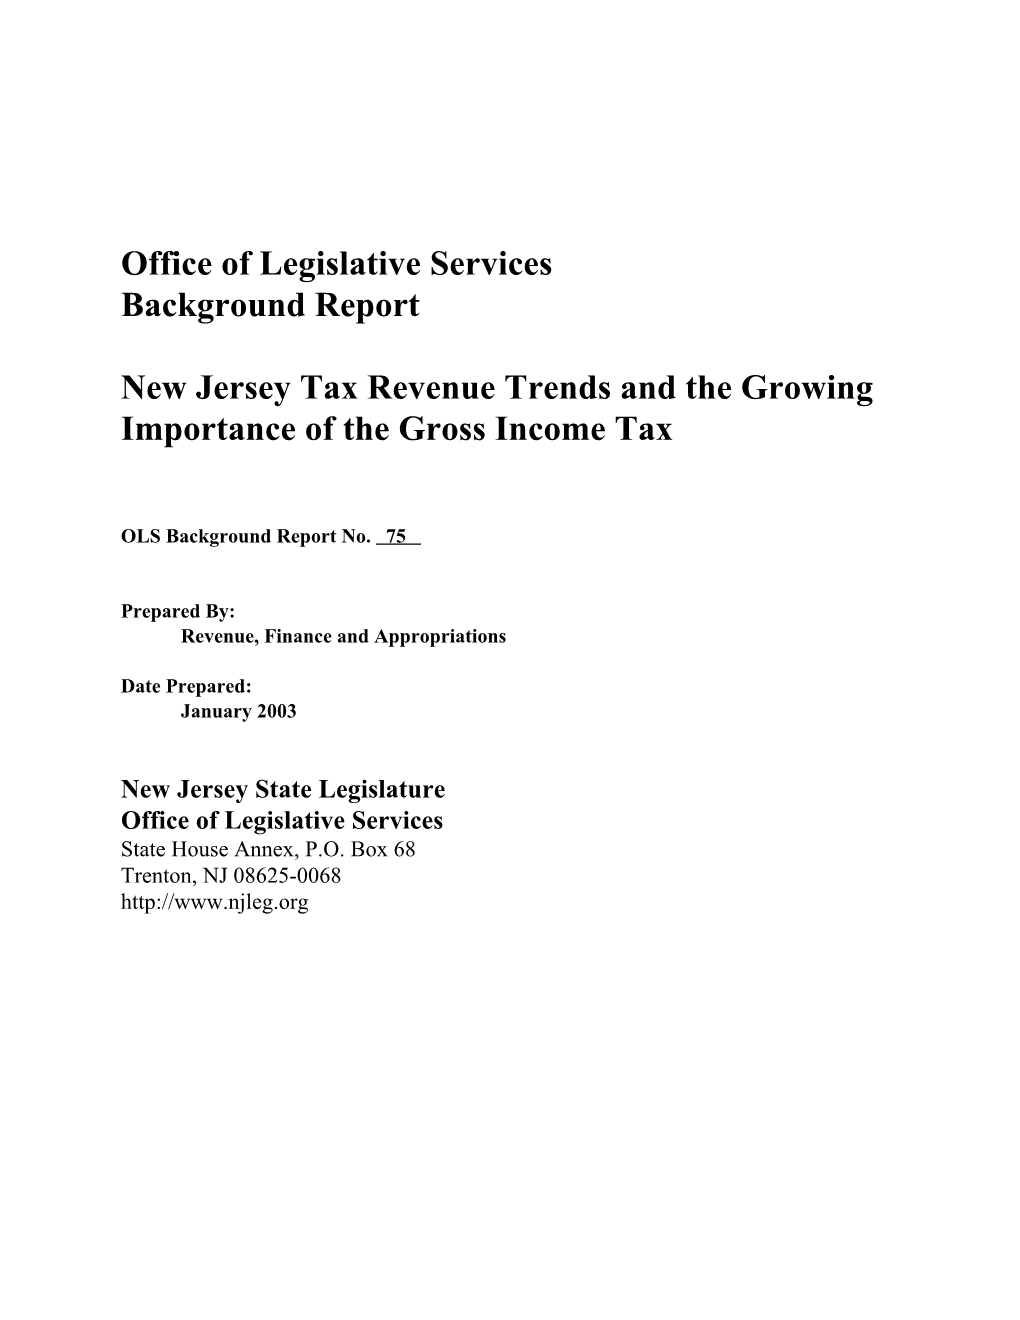 Backgrounder: NJ Tax Revenue Trends and the Growing